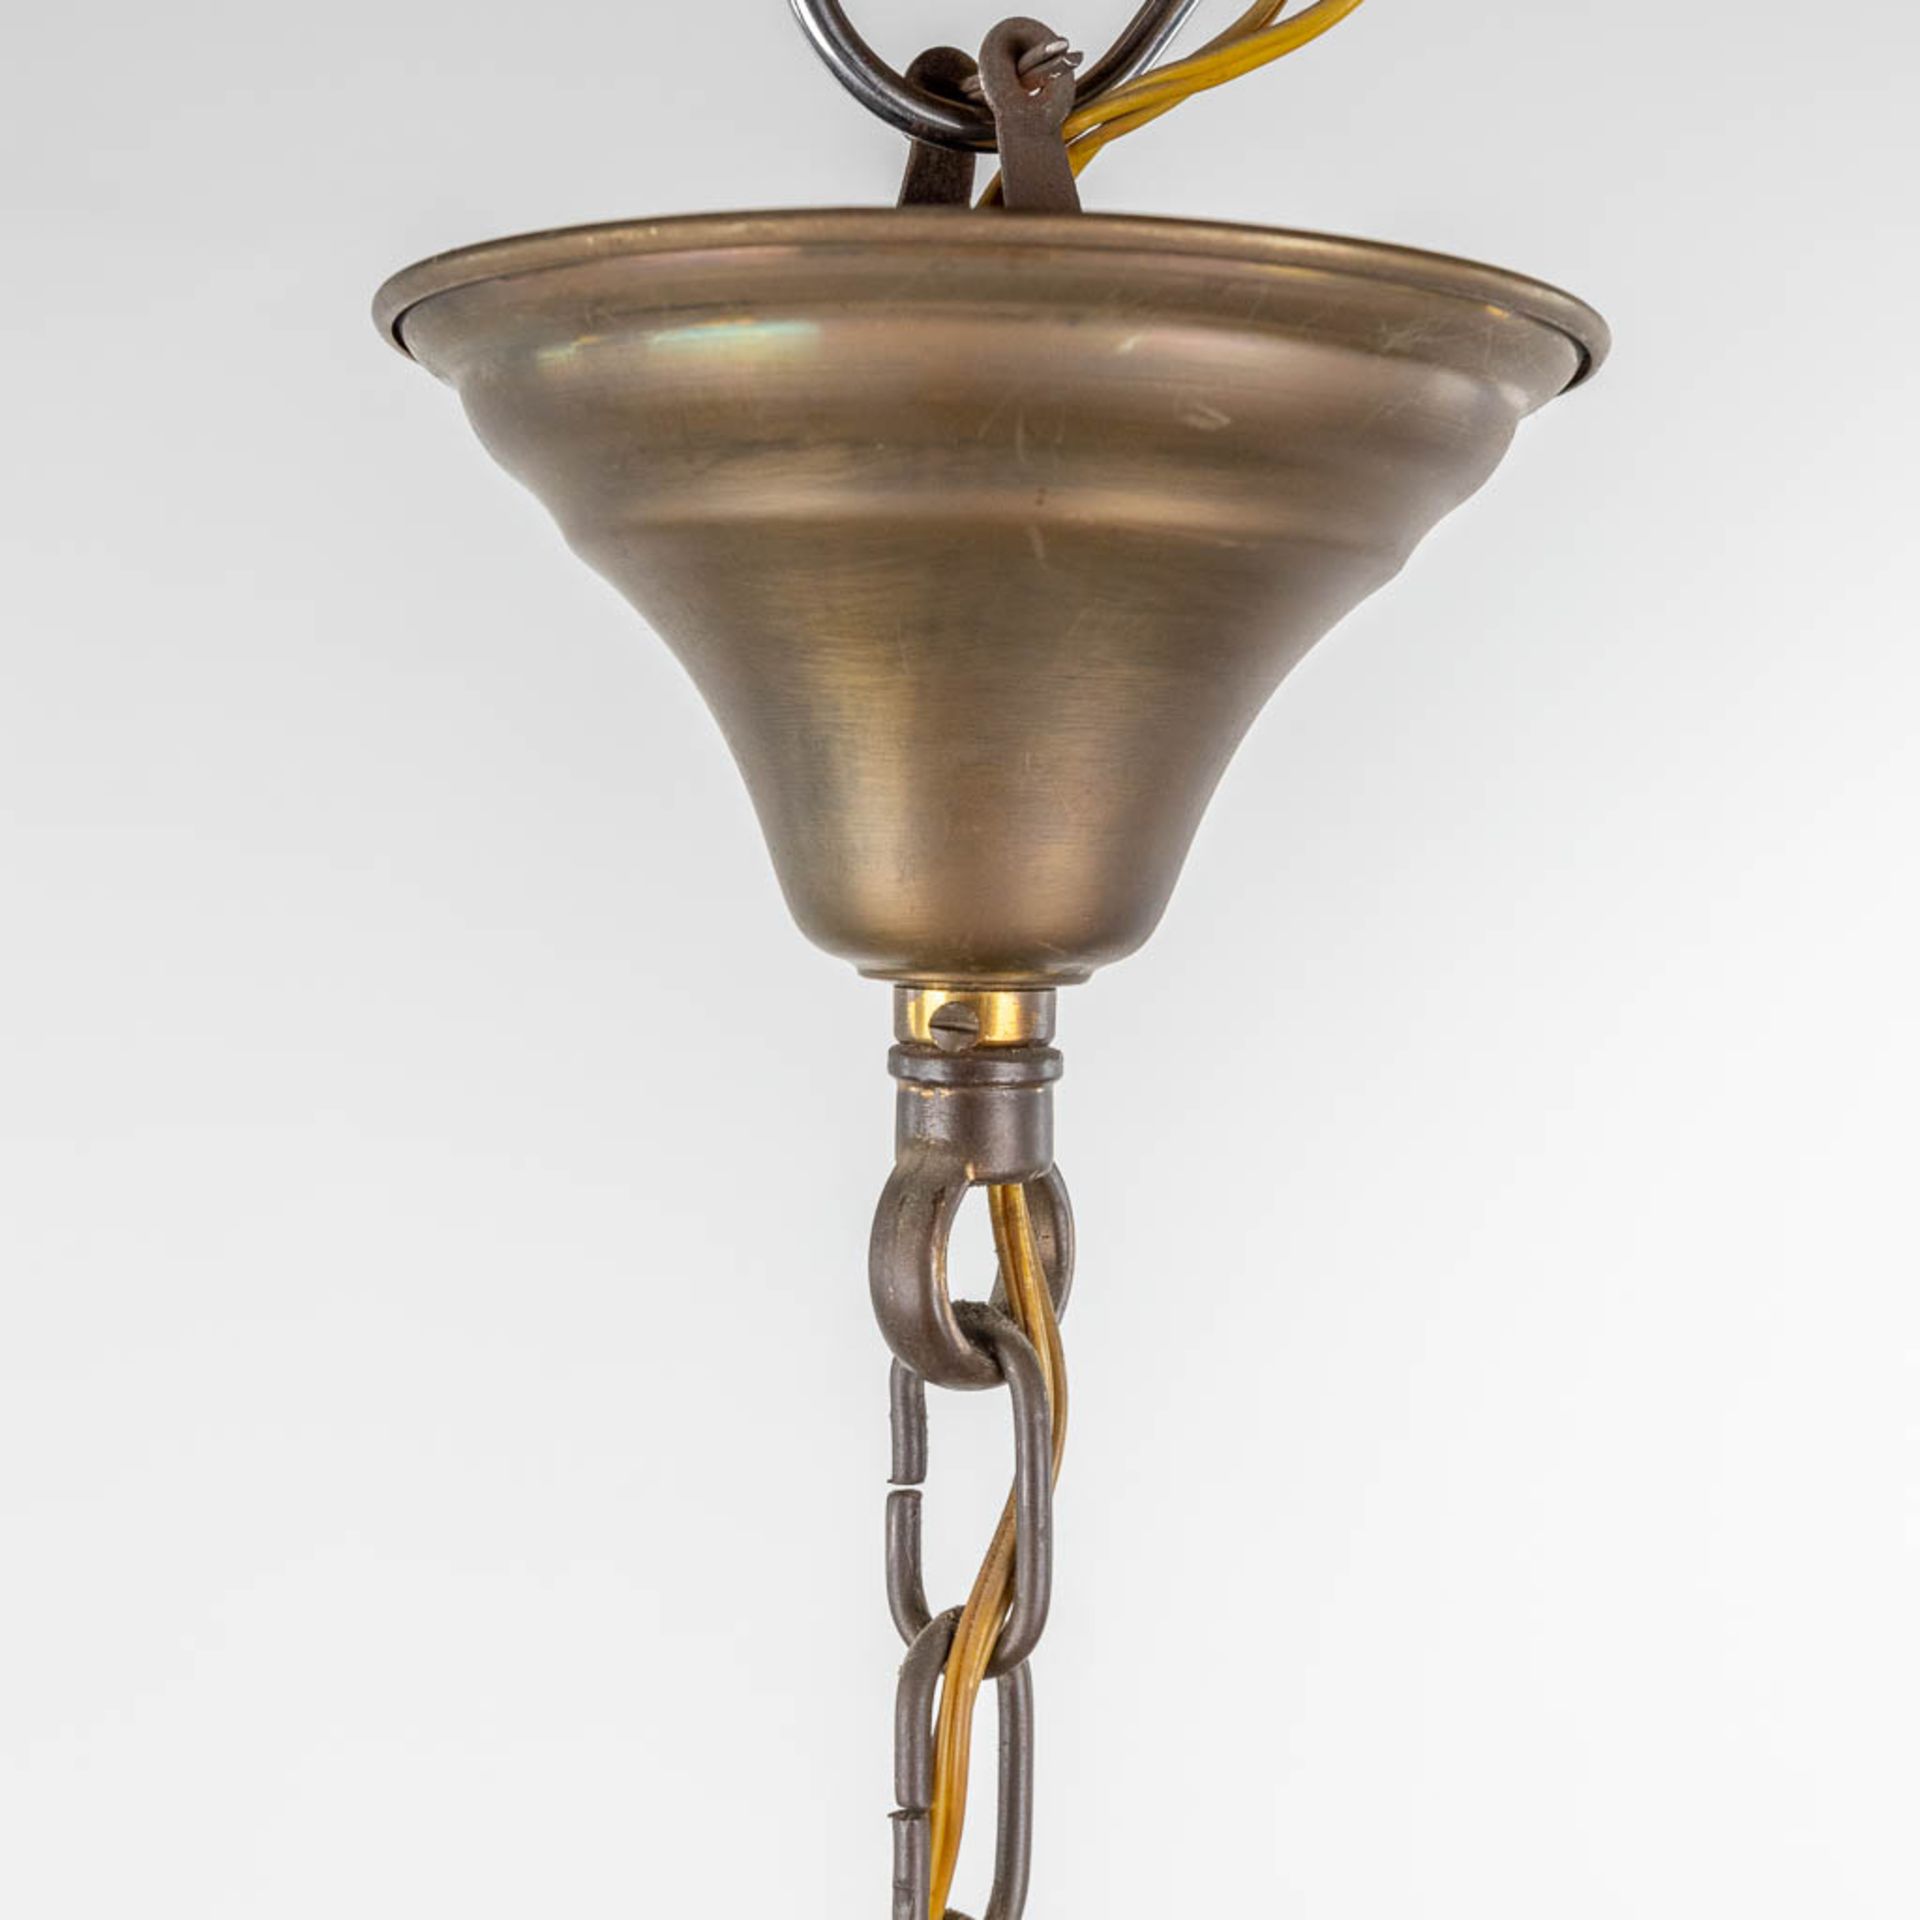 A chandelier 'Sac A Perles' decorated with tiny ram's heads. 20th century. (H: 83 x D: 42 cm) - Bild 9 aus 10